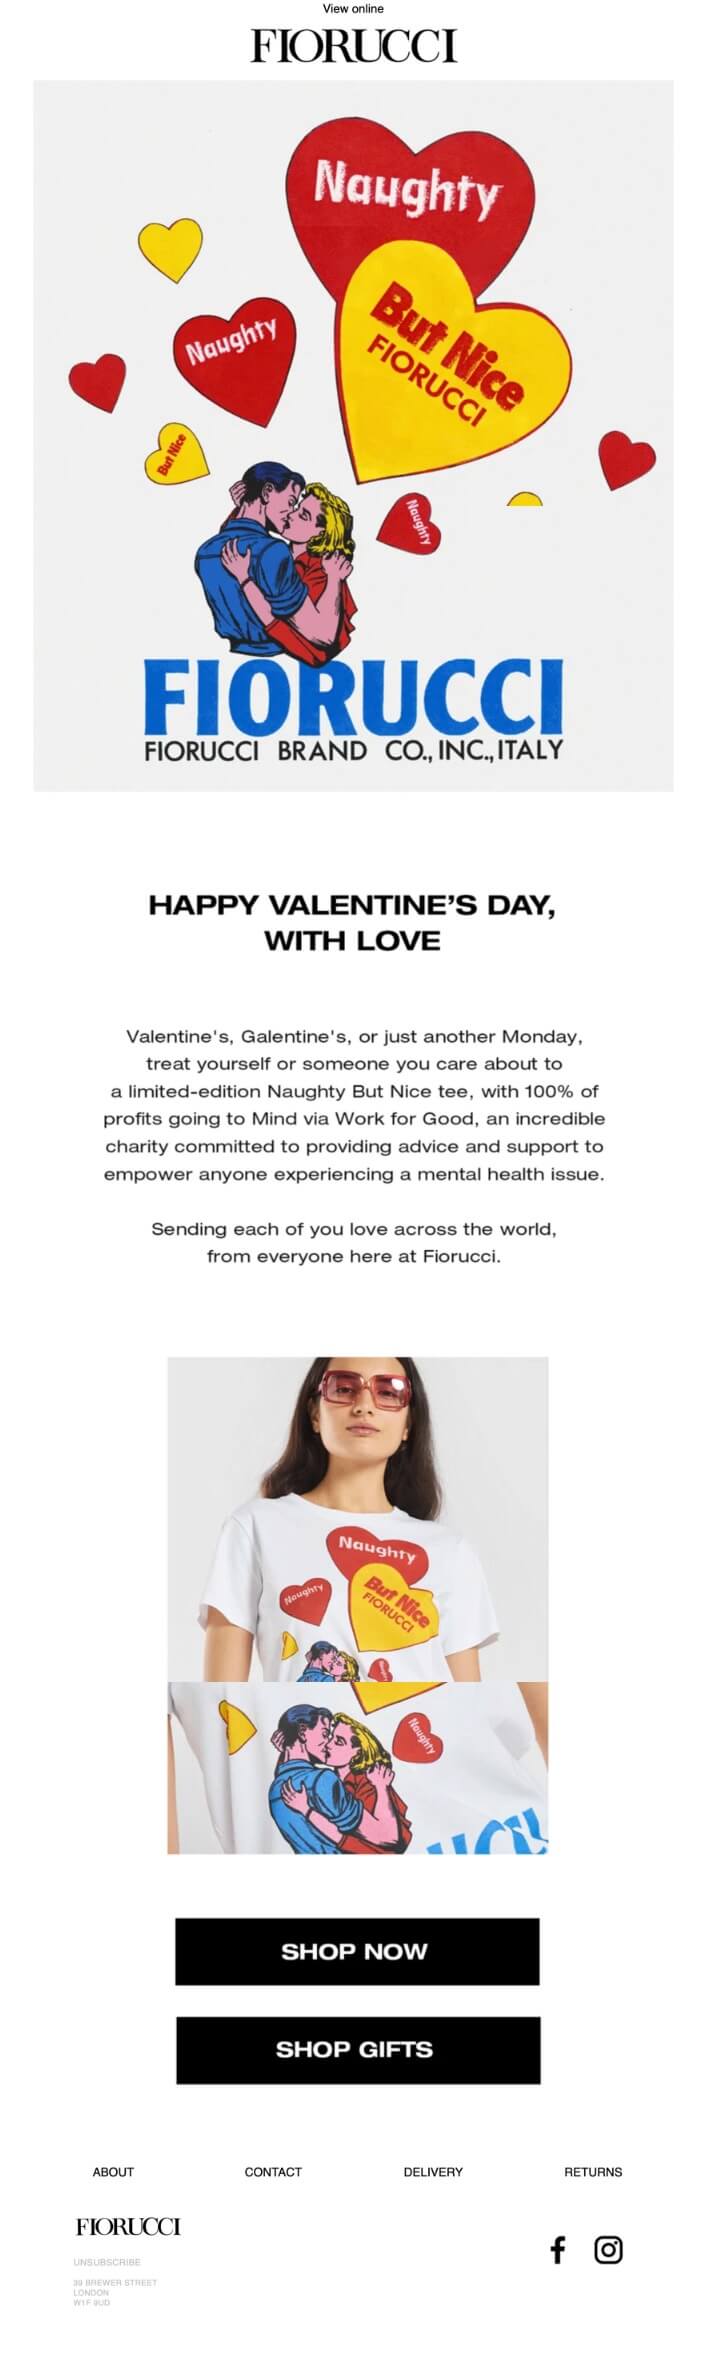 A Fiorucci Valentine’s email with a simple appreciation of the Valentine’s Day